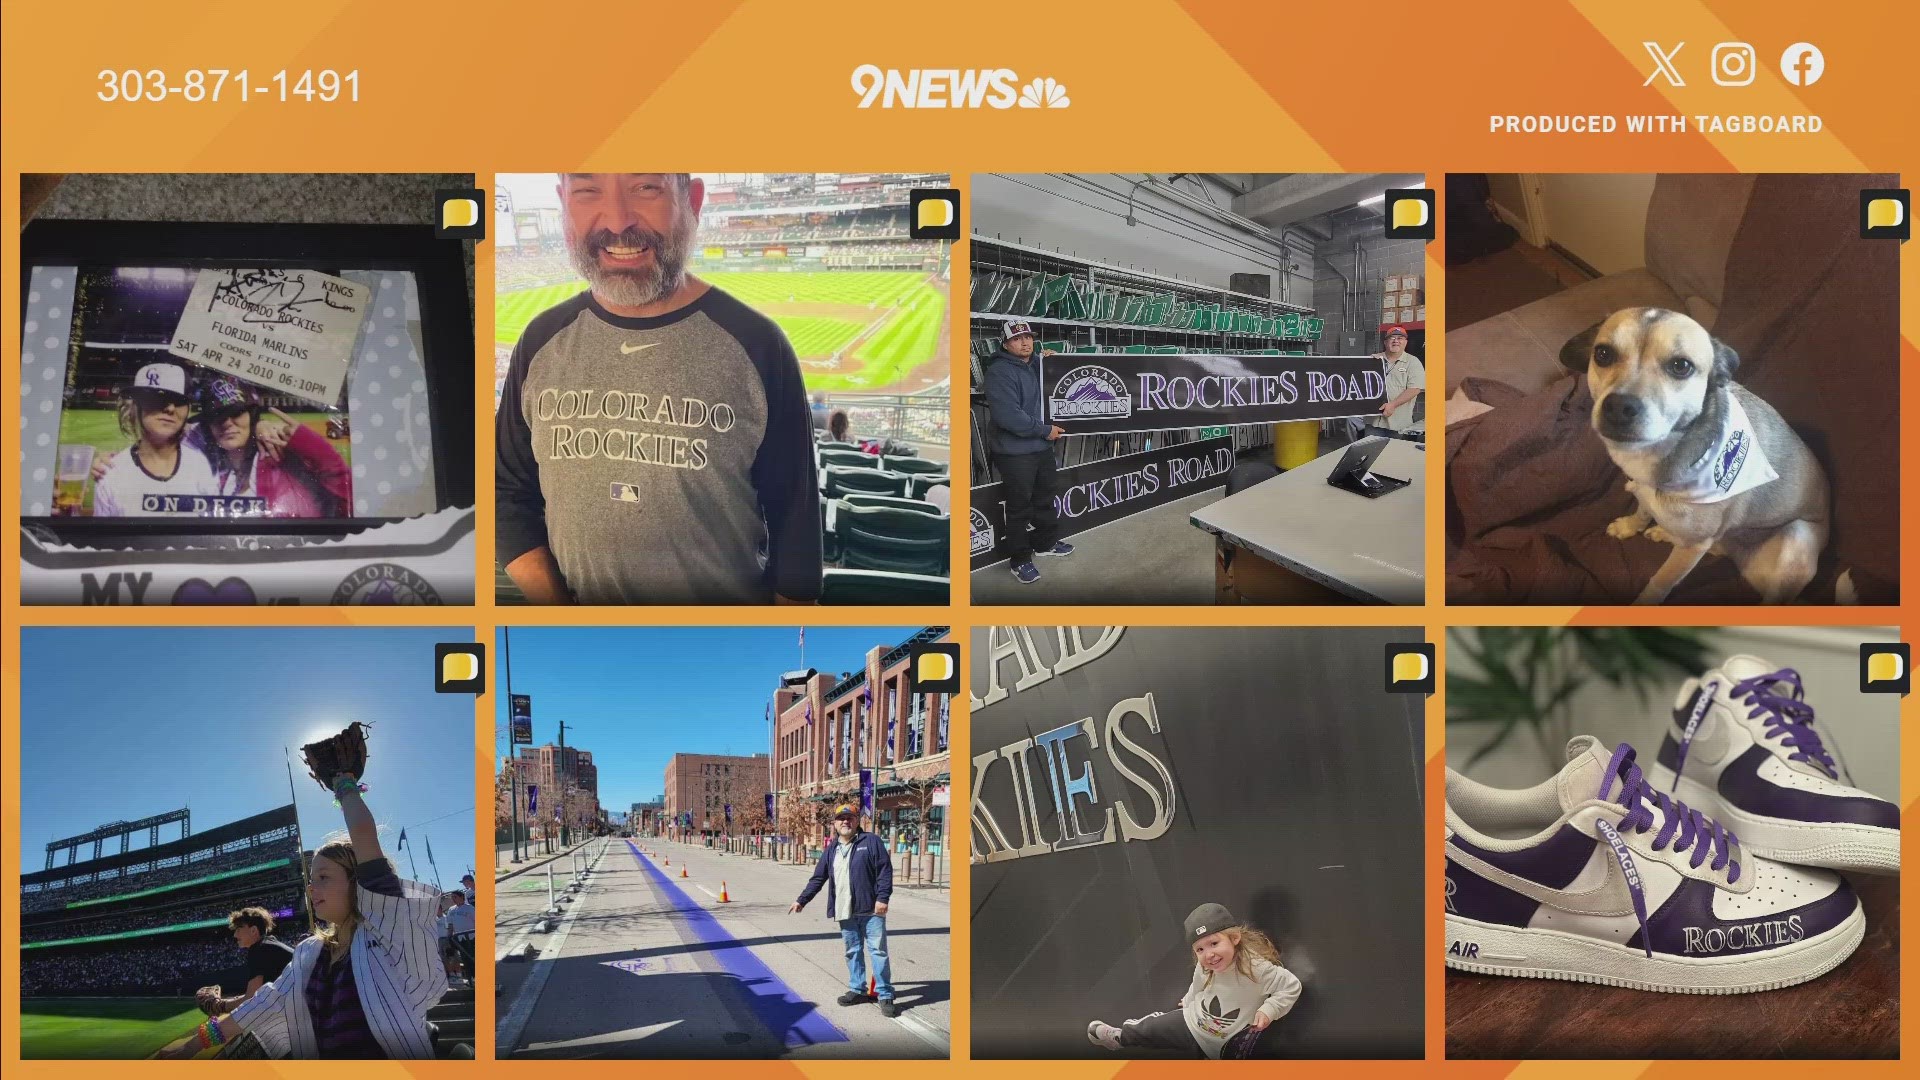 Send in your pictures and videos through the 'Near Me' tab on the 9NEWS app or by sending them to 303-871-1491.